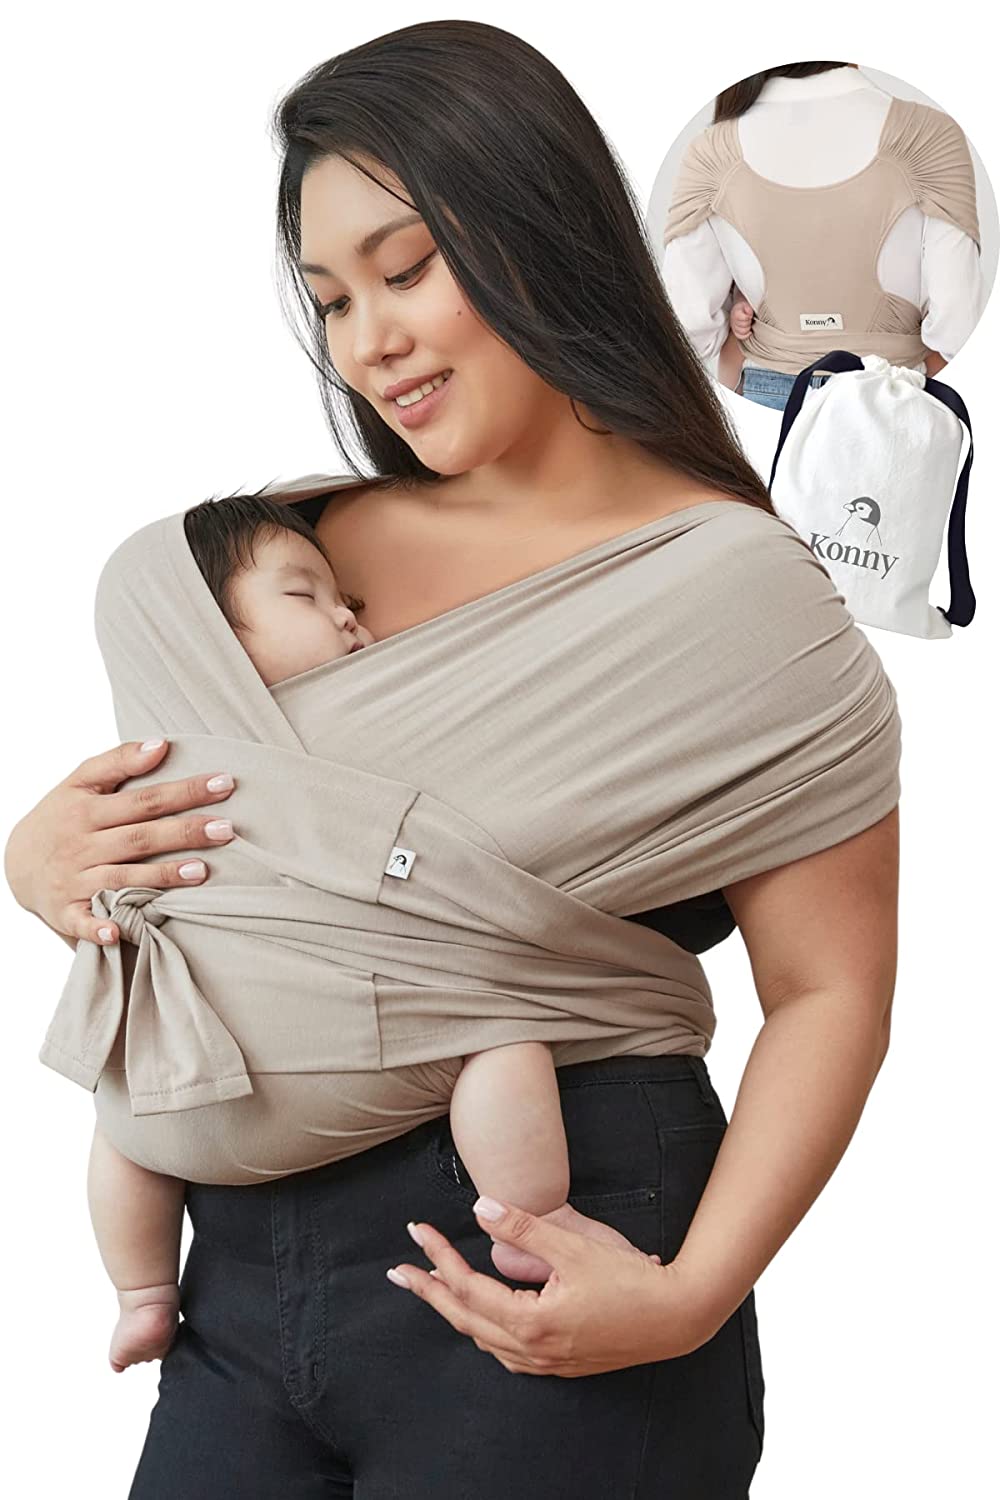 Konny Baby Carrier | Ultra-Lightweight Easy Swaddle | Newborns, Infants up to 20 kg Toddlers | Soft and Breathable Fabric | Useful Sleep Solution (Beige, XL)